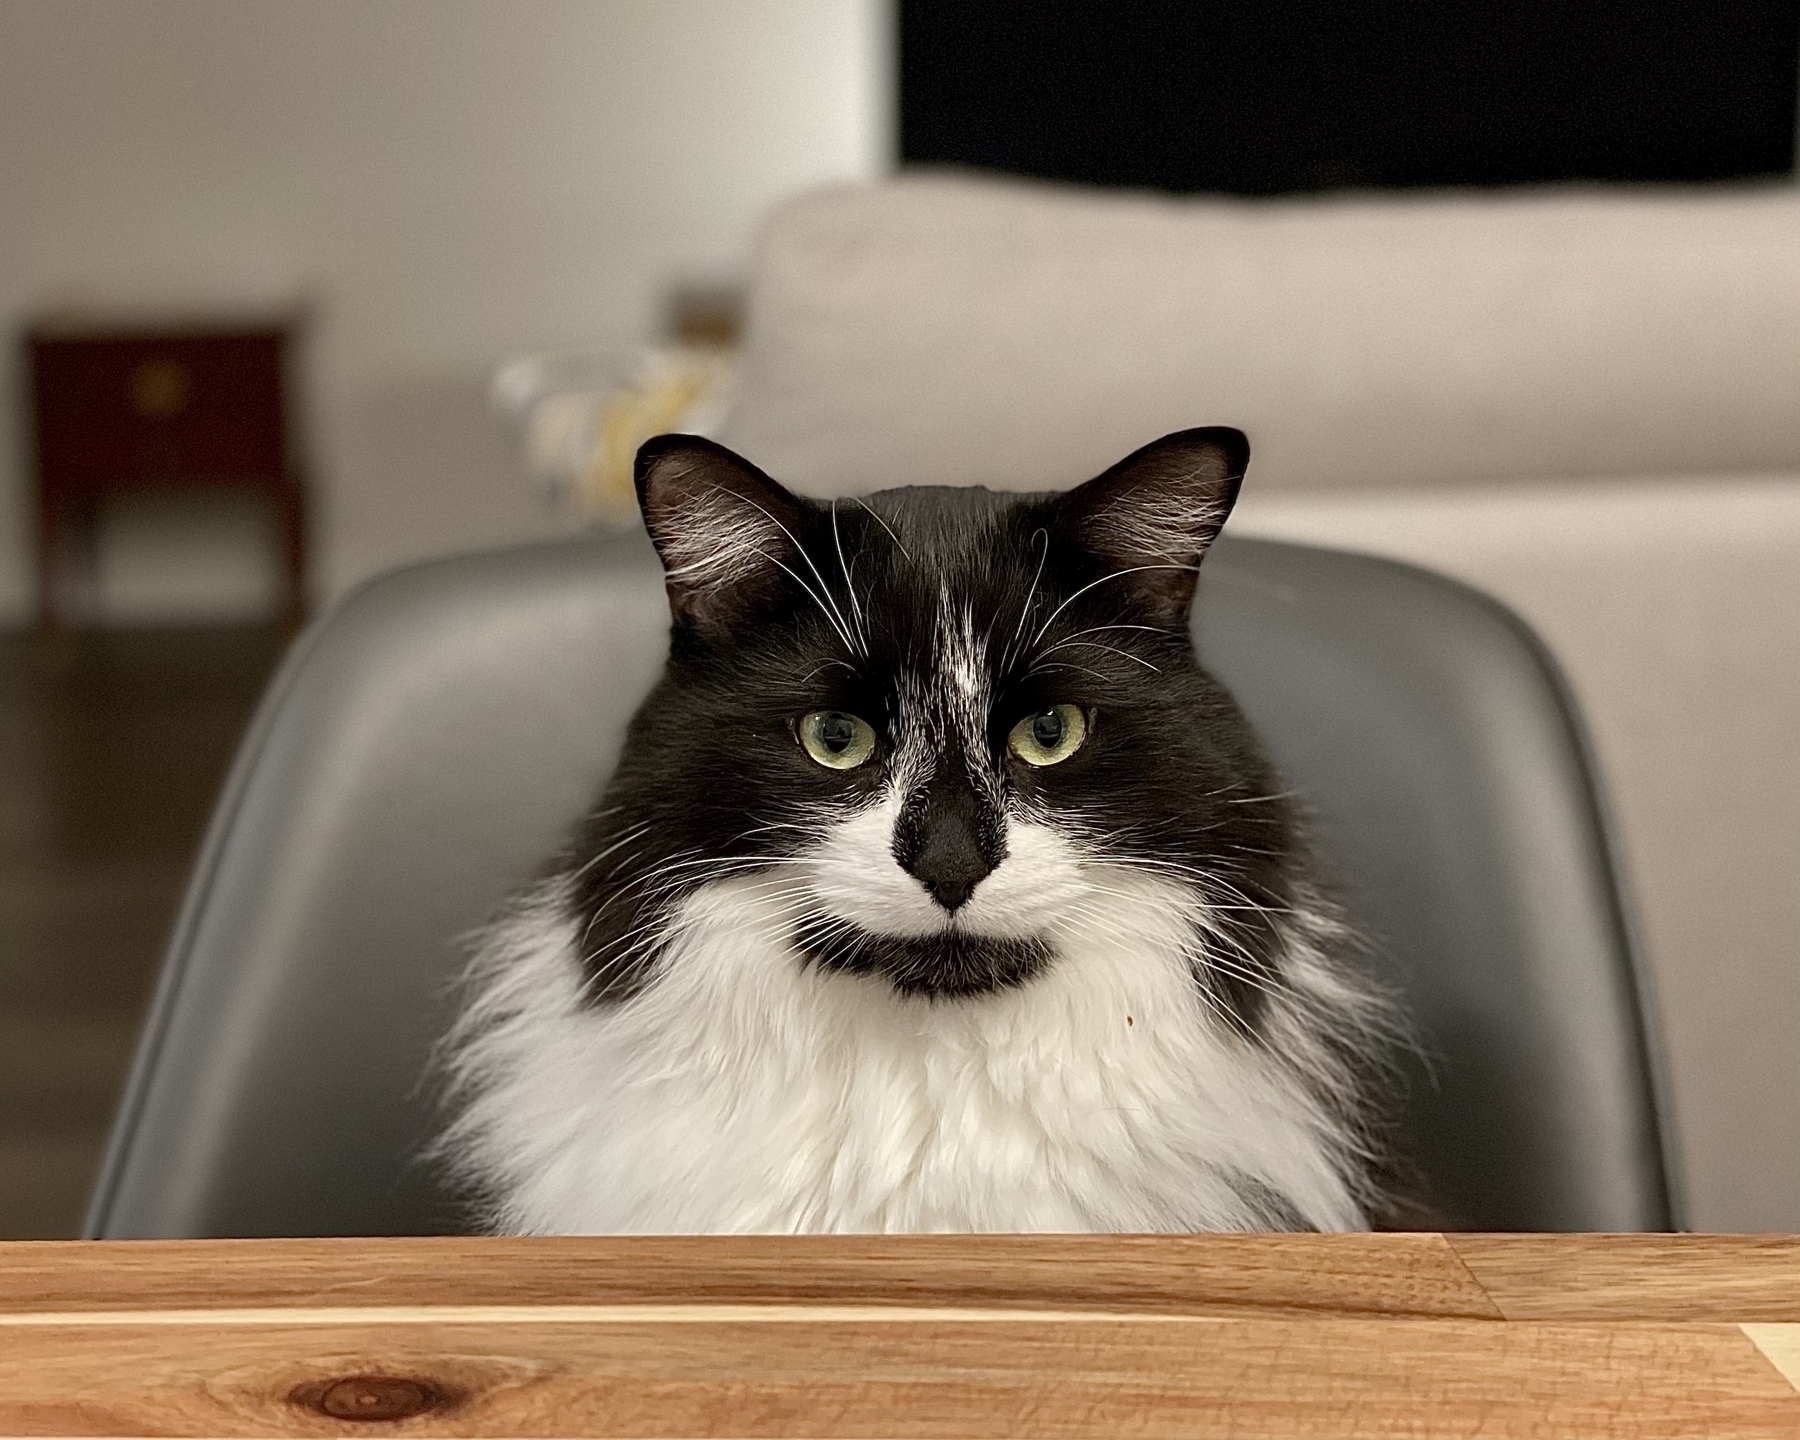 A black and white tuxedo cat seated in a chair at the dinner table looks into the camera with a serious look on its face.